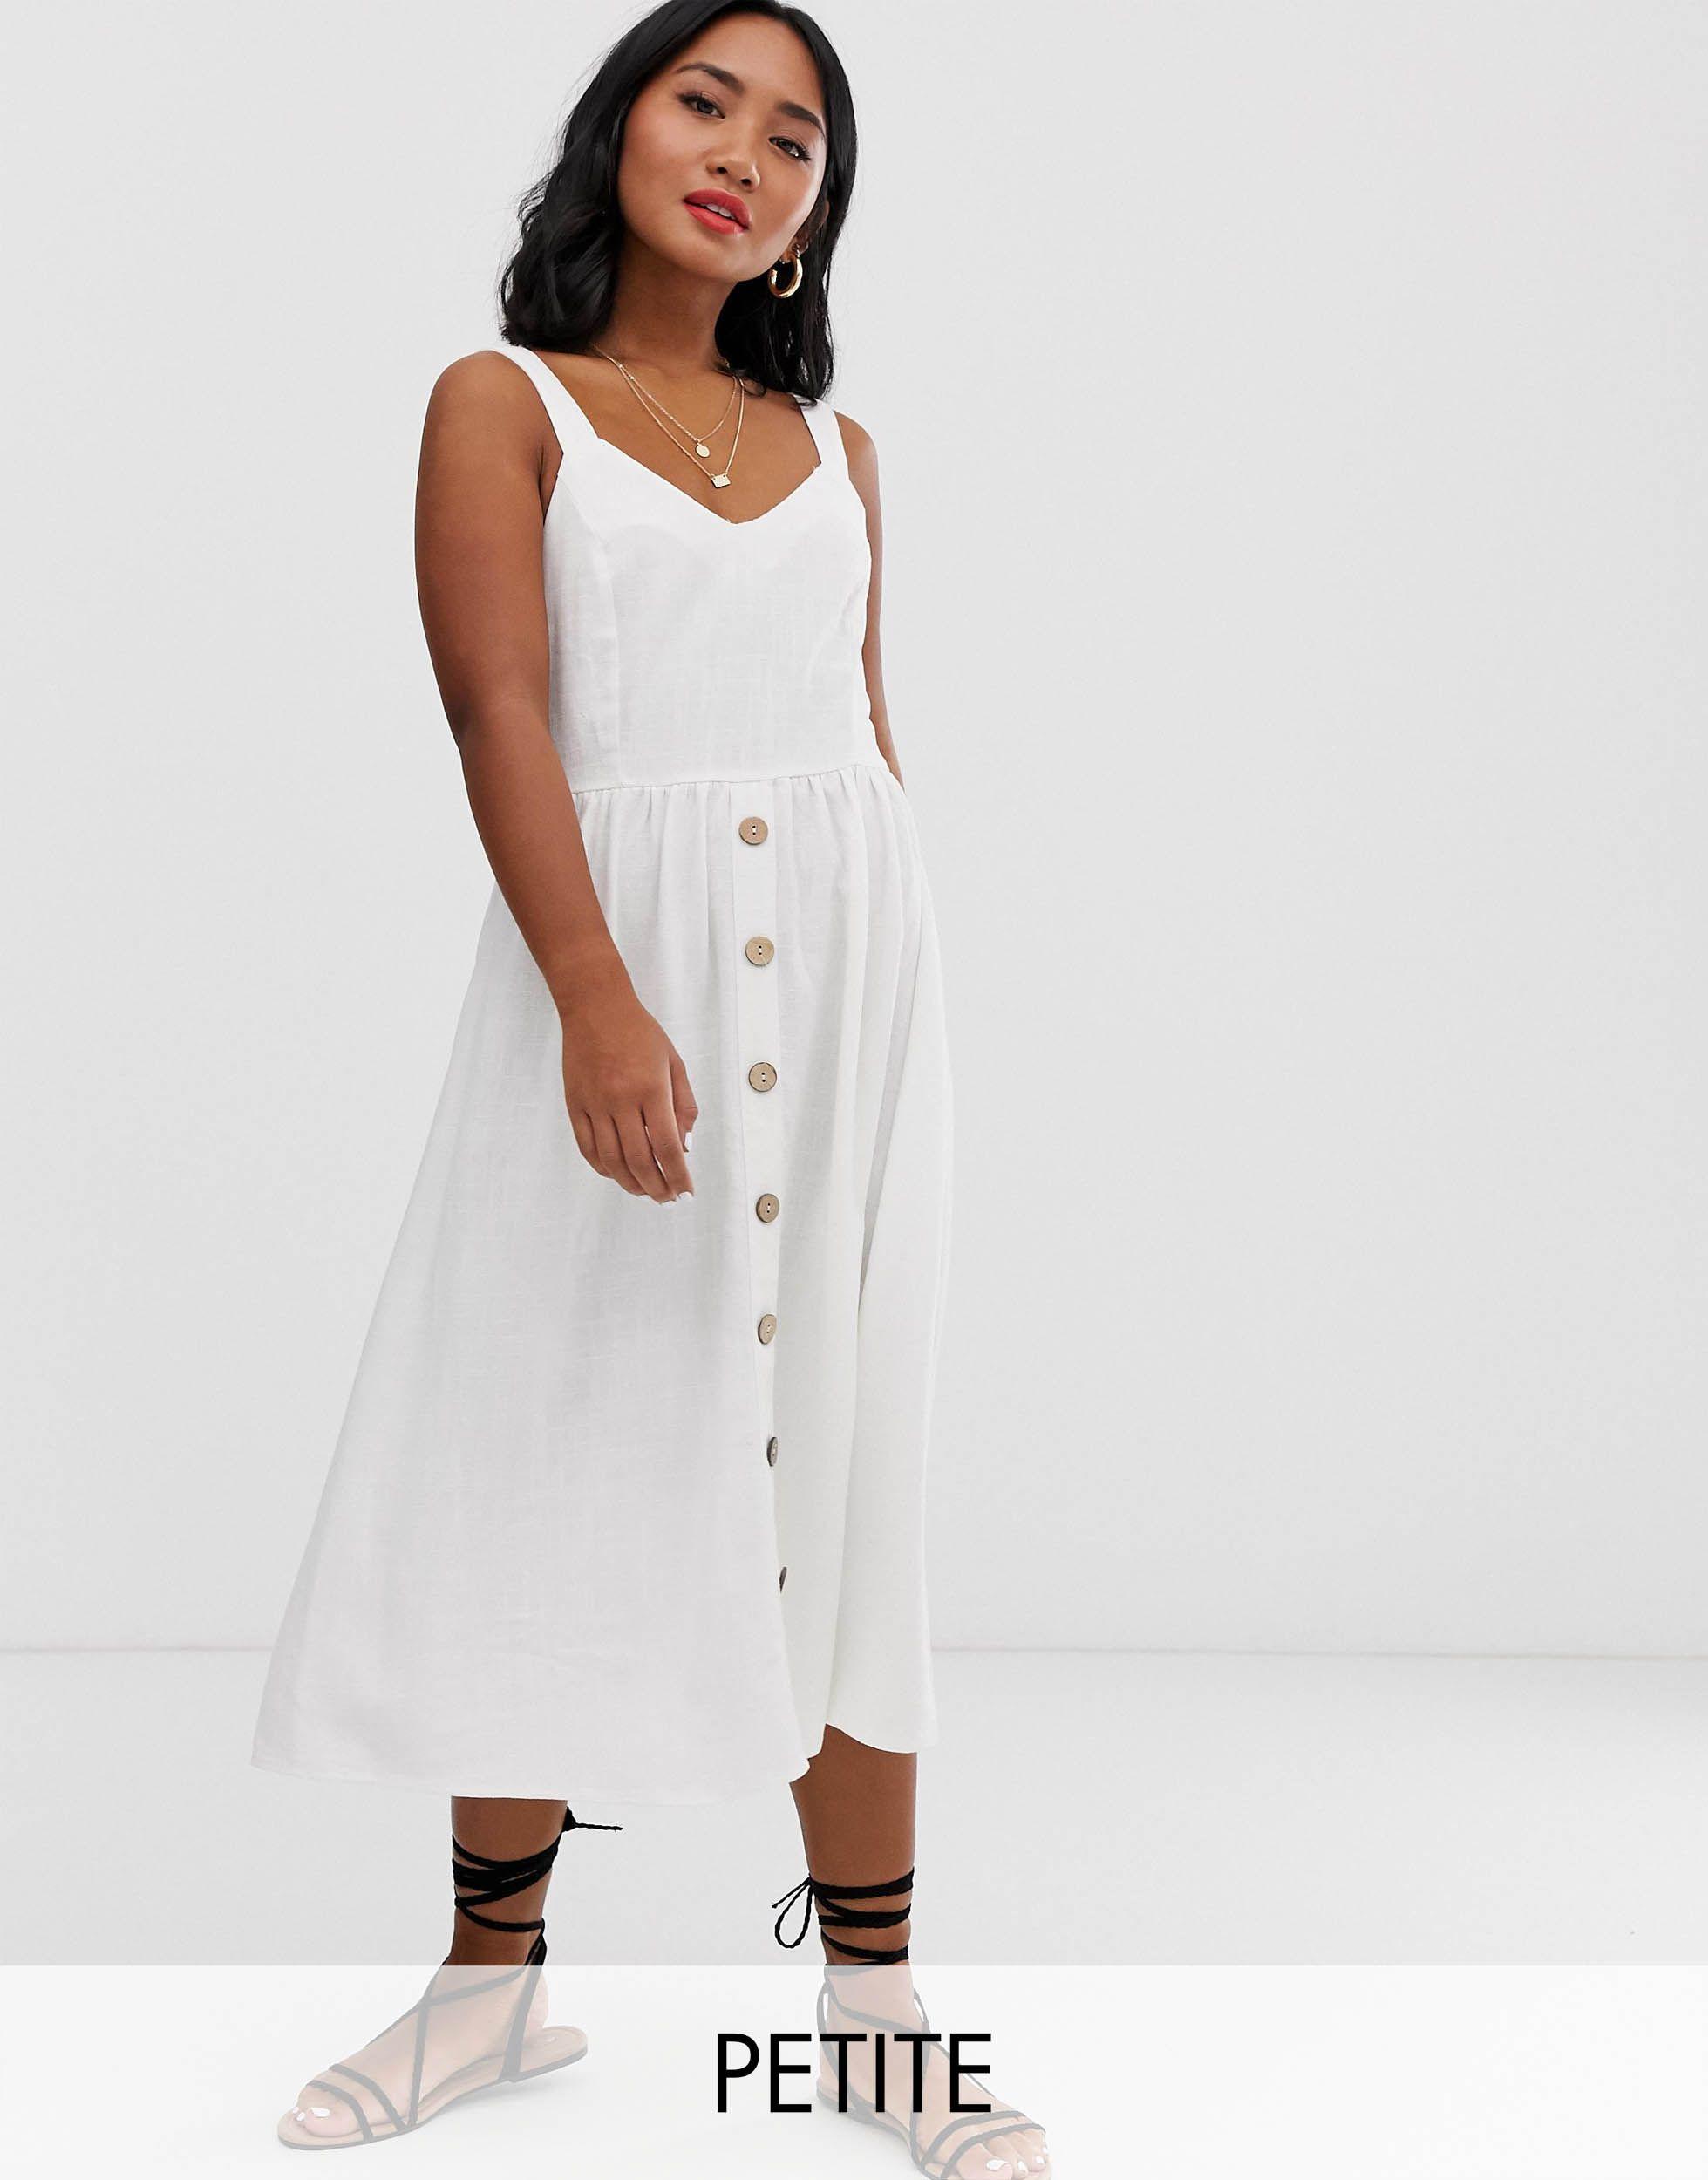 new look button down dress